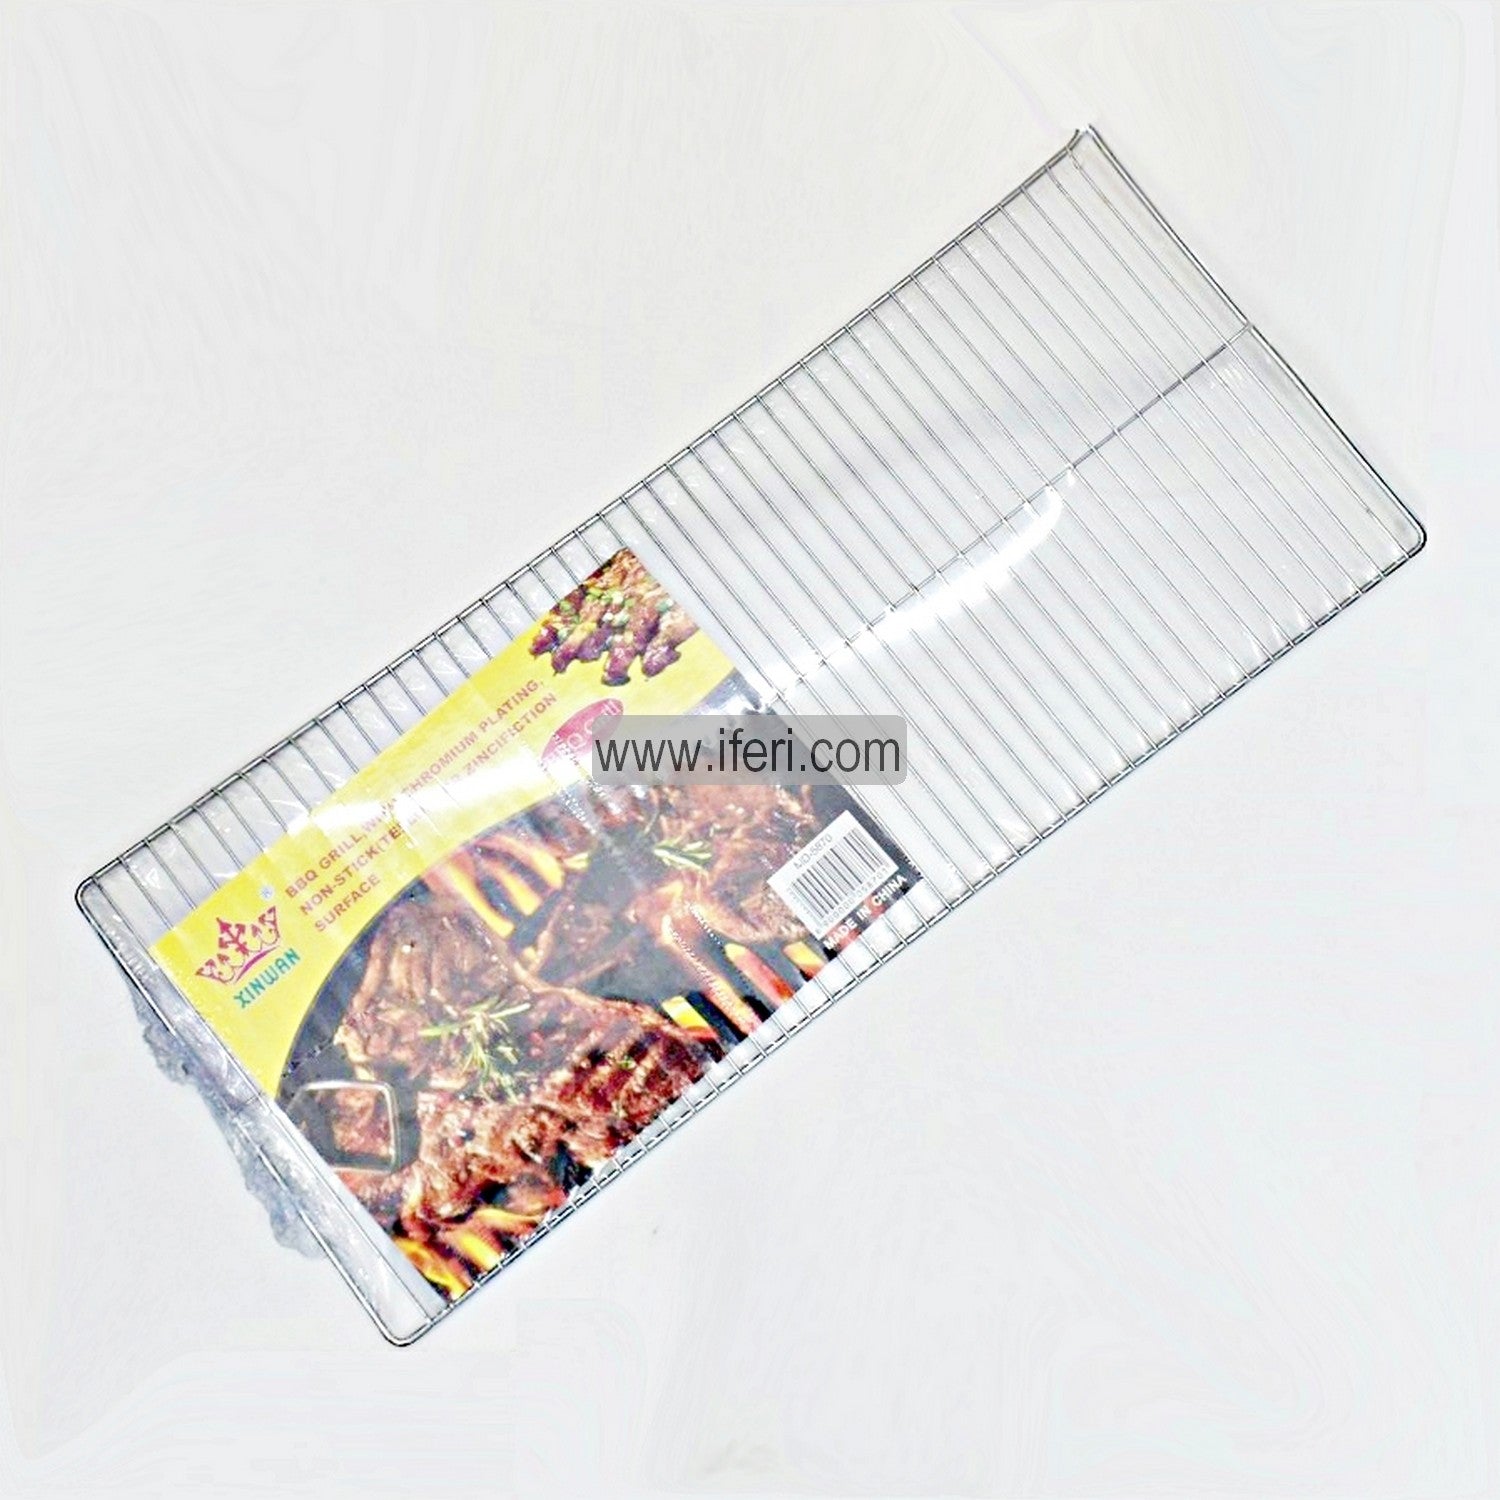 29.5 Inch Barbeque Grill Net KHQ7845